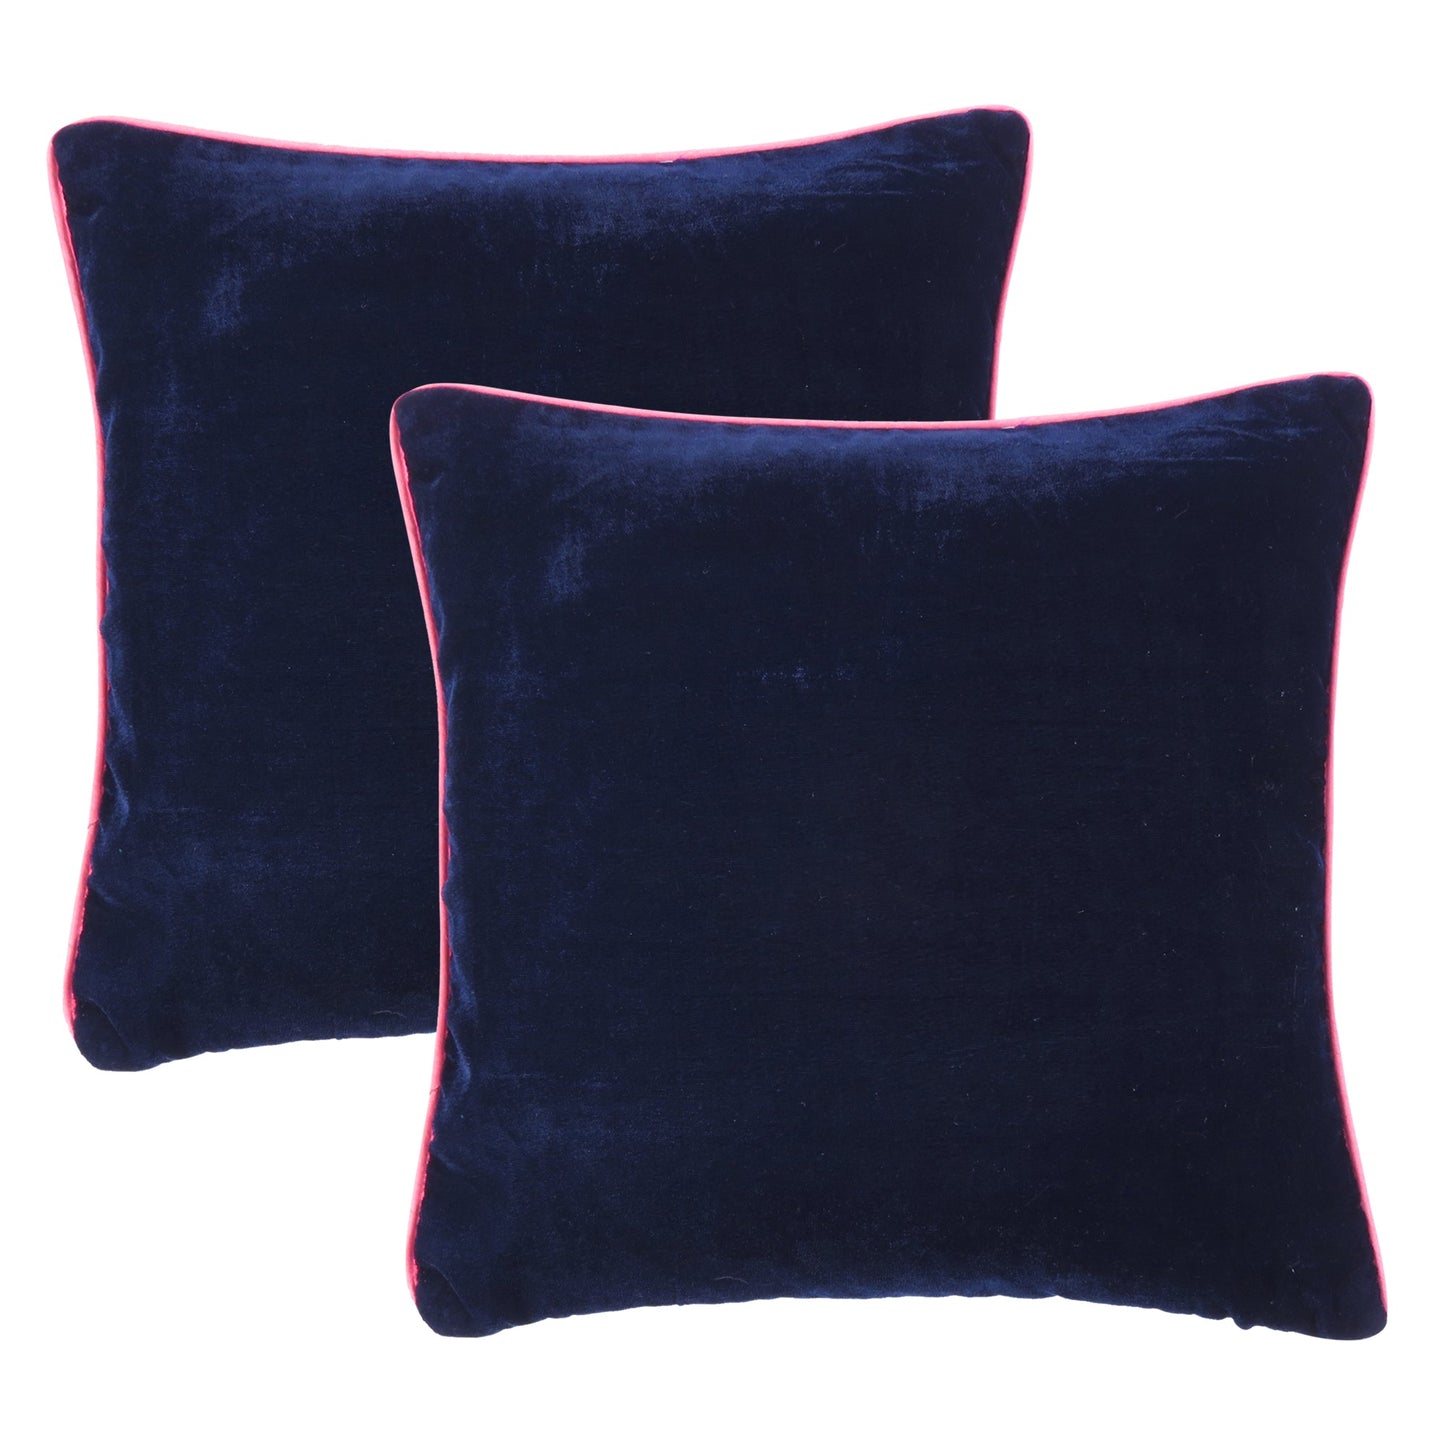 Navy Blue Velvet Cushion Cover with Light Pink Piping Edge in Set of 2